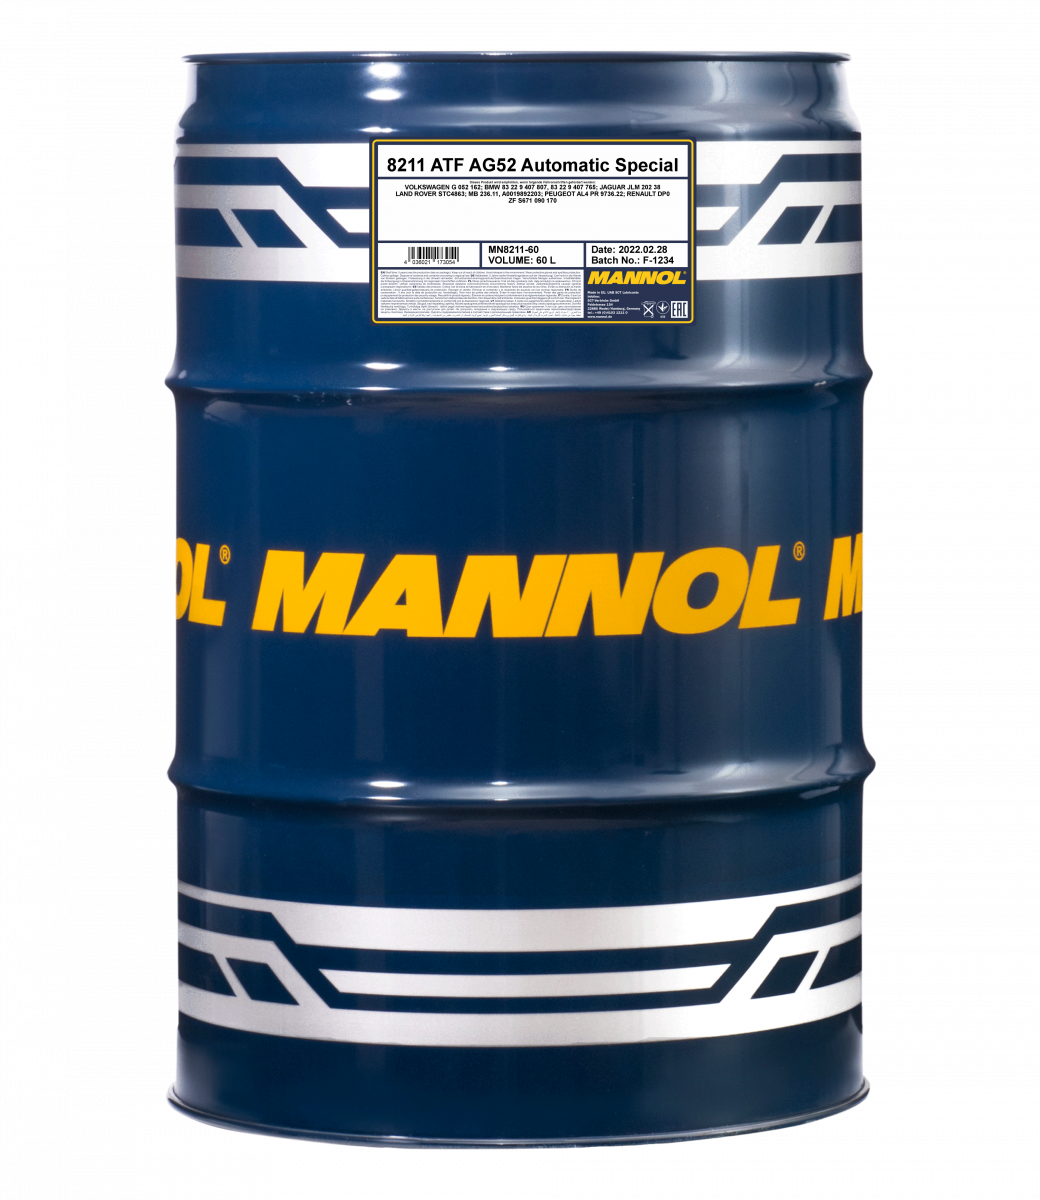 Mannol 8211 ATF AG52 Automatic Special 60 Liter